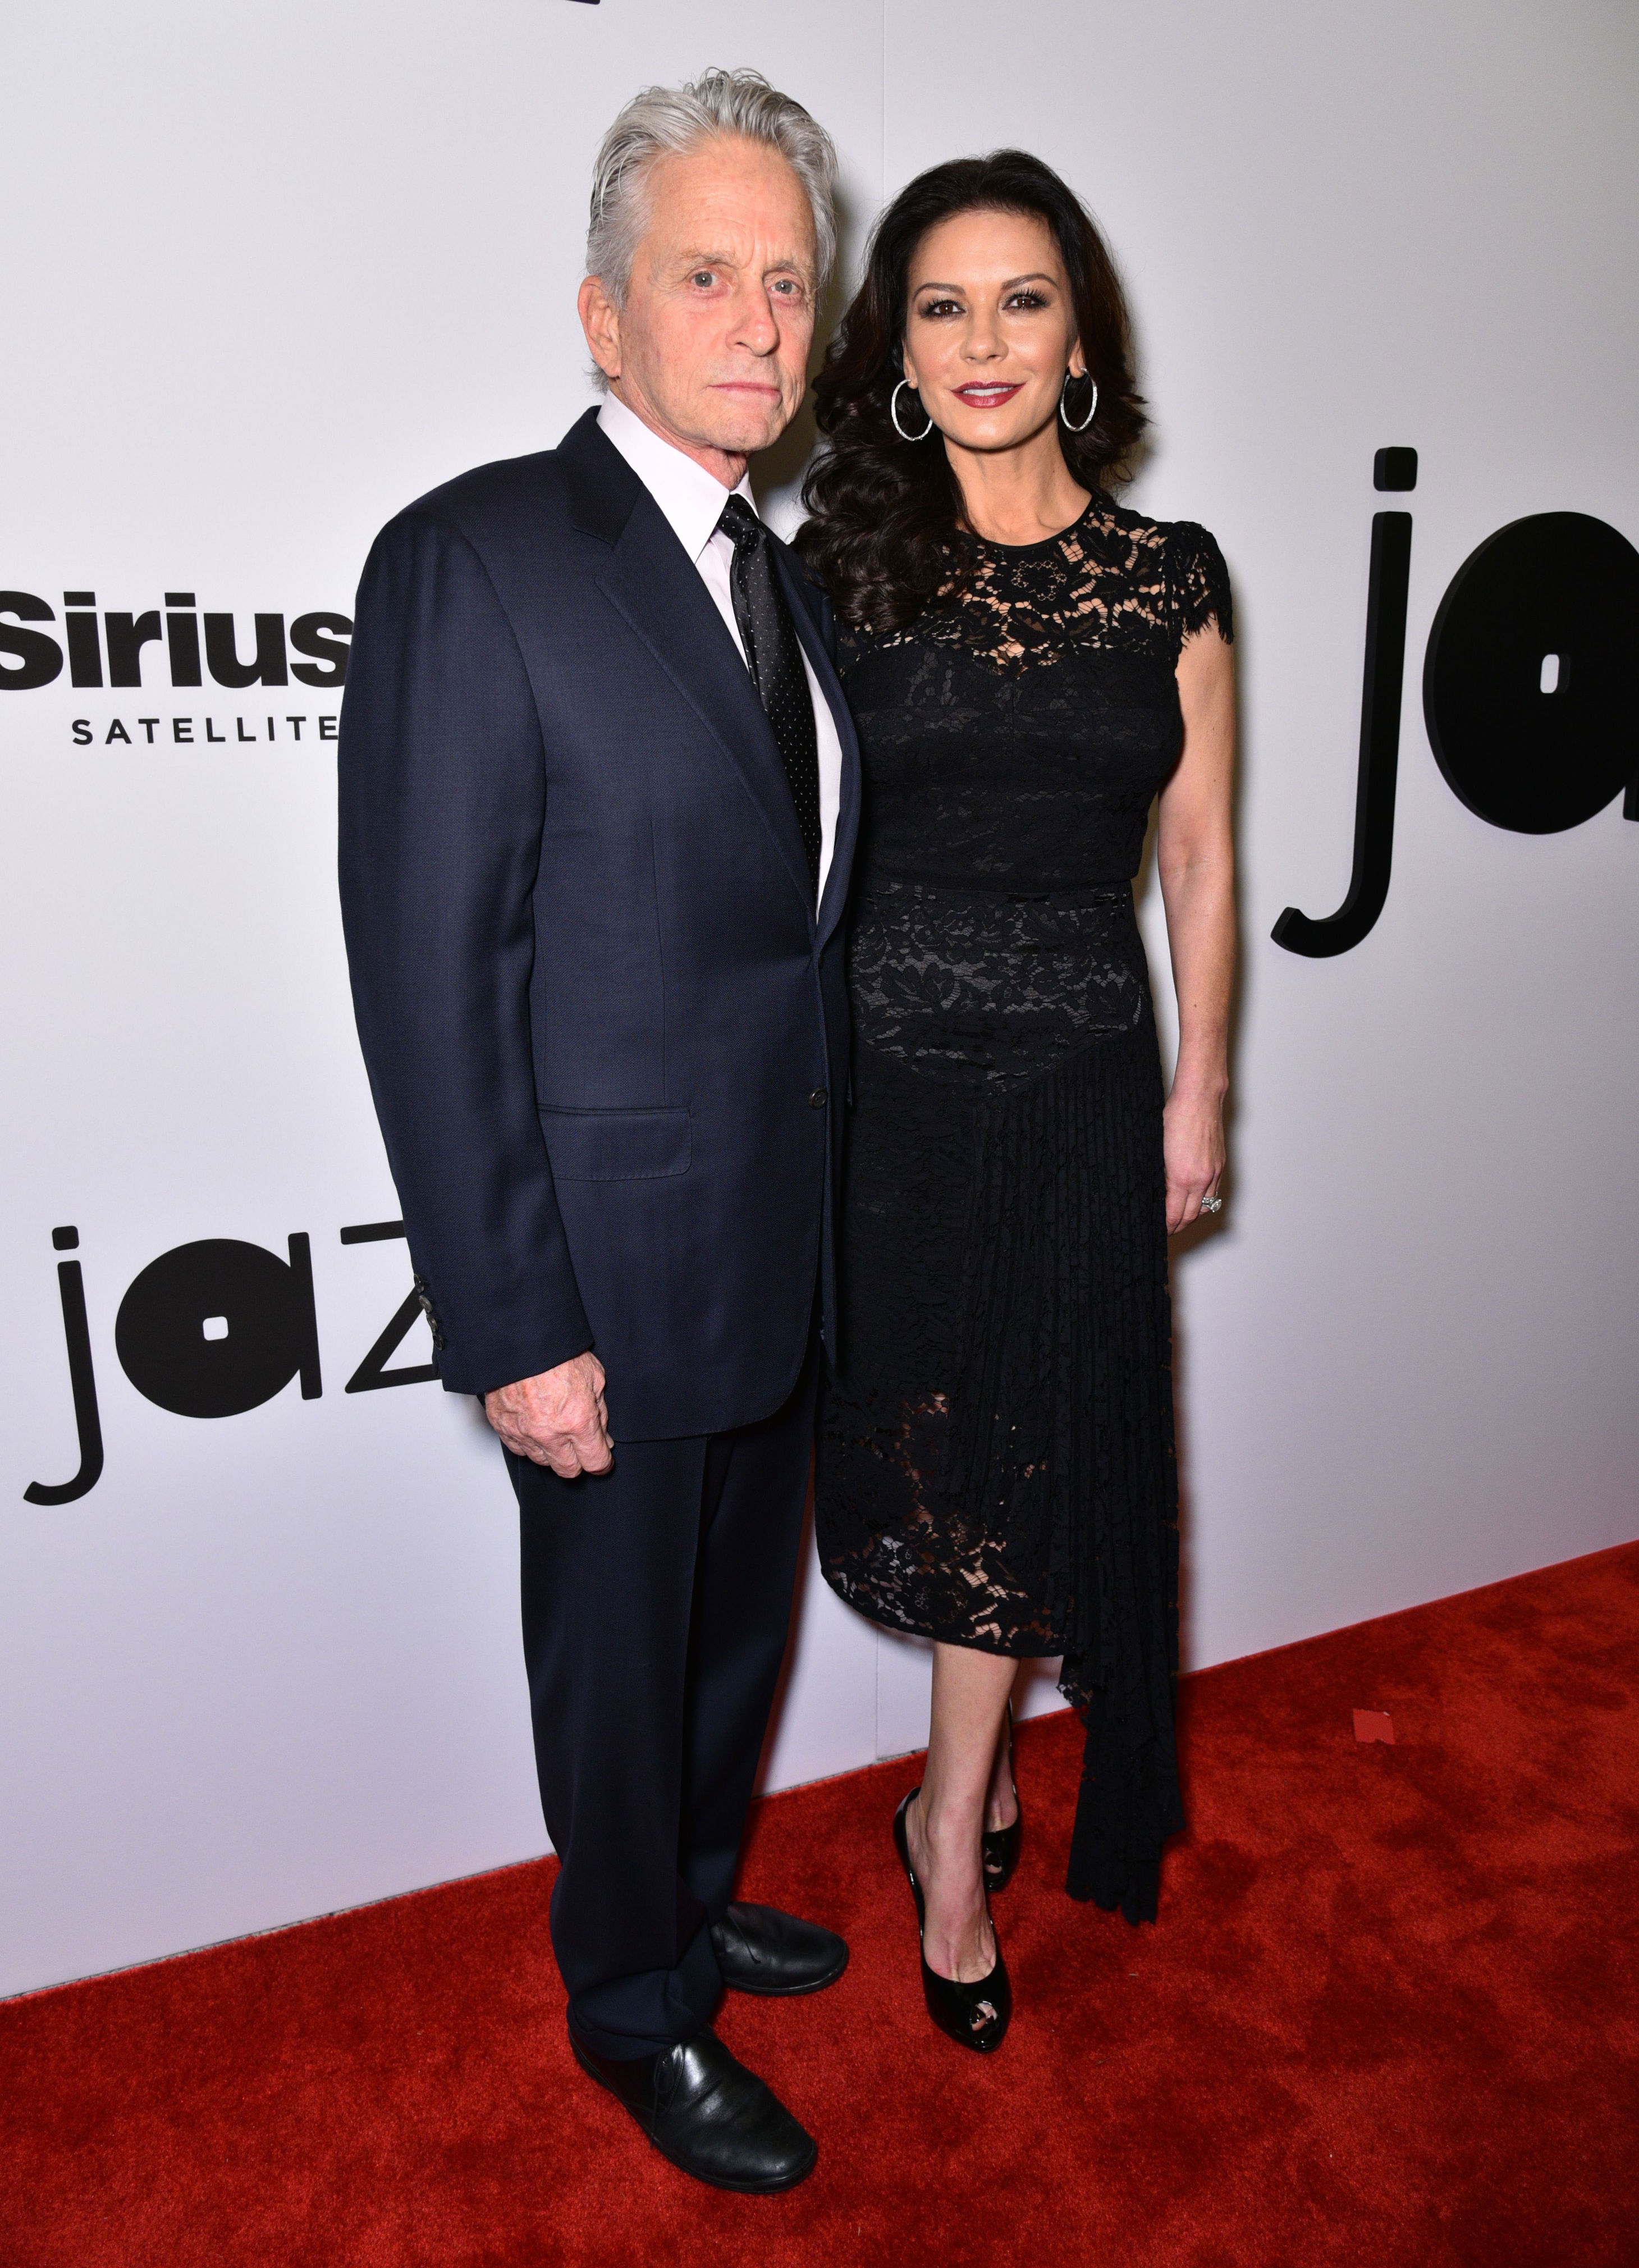 <p>Michael Douglas and <a href="https://www.wonderwall.com/celebrity/profiles/overview/catherine-zeta-jones-1030.article">Catherine Zeta-Jones</a> have been married since 2000. They treaded some rocky waters and separated for a short while in 2013 but are happy together now. Michael is 25 years older than the Oscar-winning actress, whom he wed when he was 56 and she was 31. They share two children. </p>